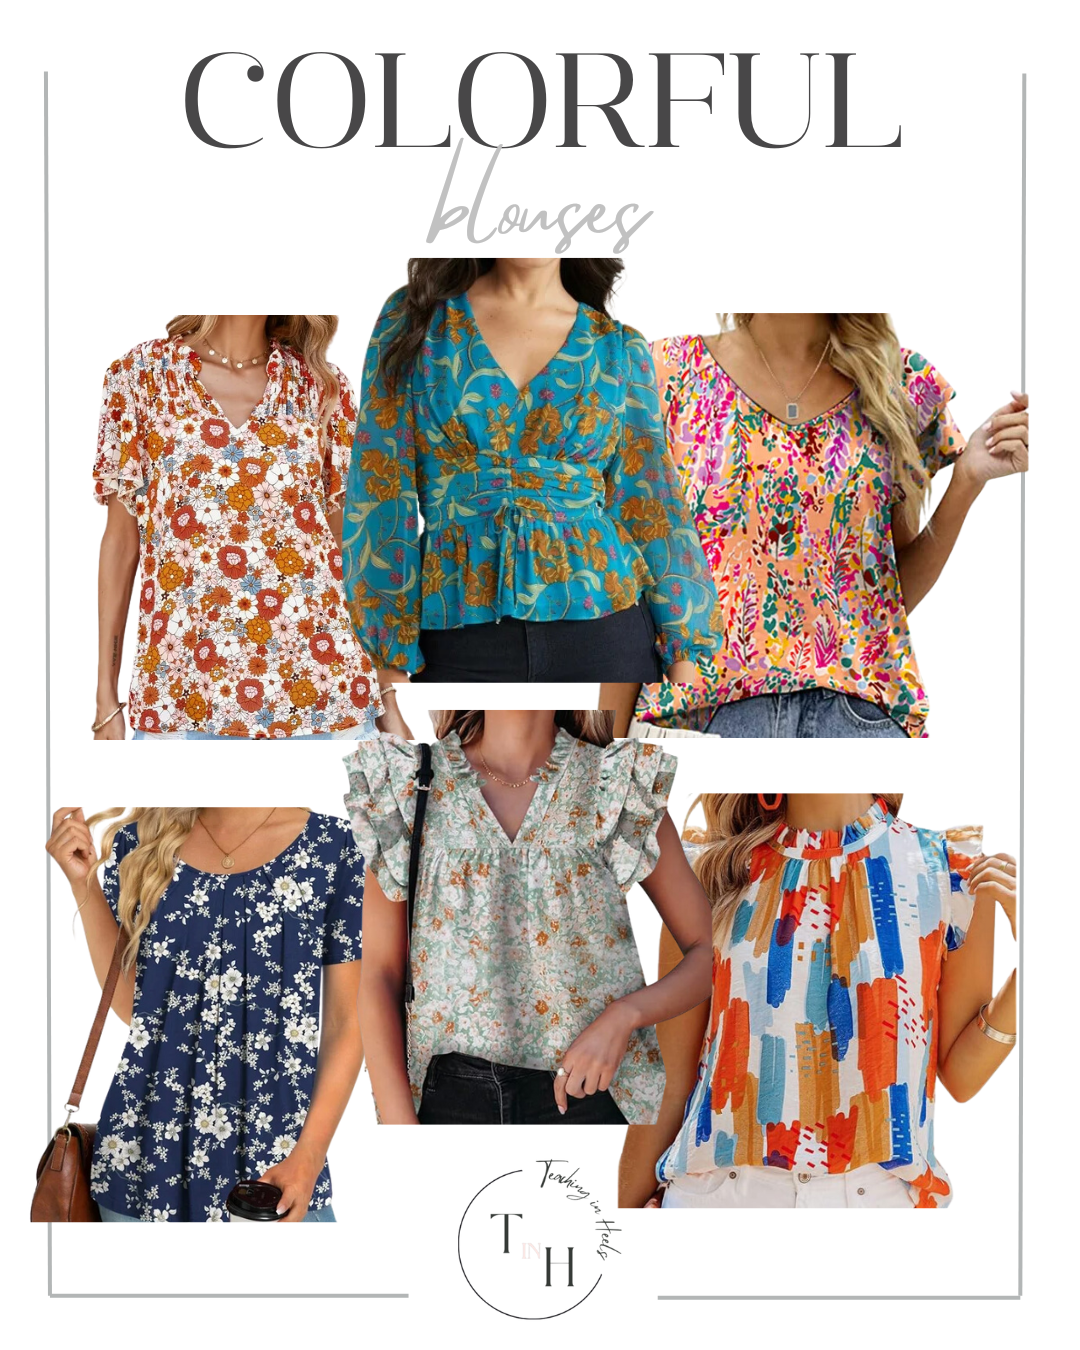 Chic & Comfortable: Spring Fashion for Teachers

spring, spring fashion, spring outfit, spring blouses, women's blouses, colorful blouses, floral blouses